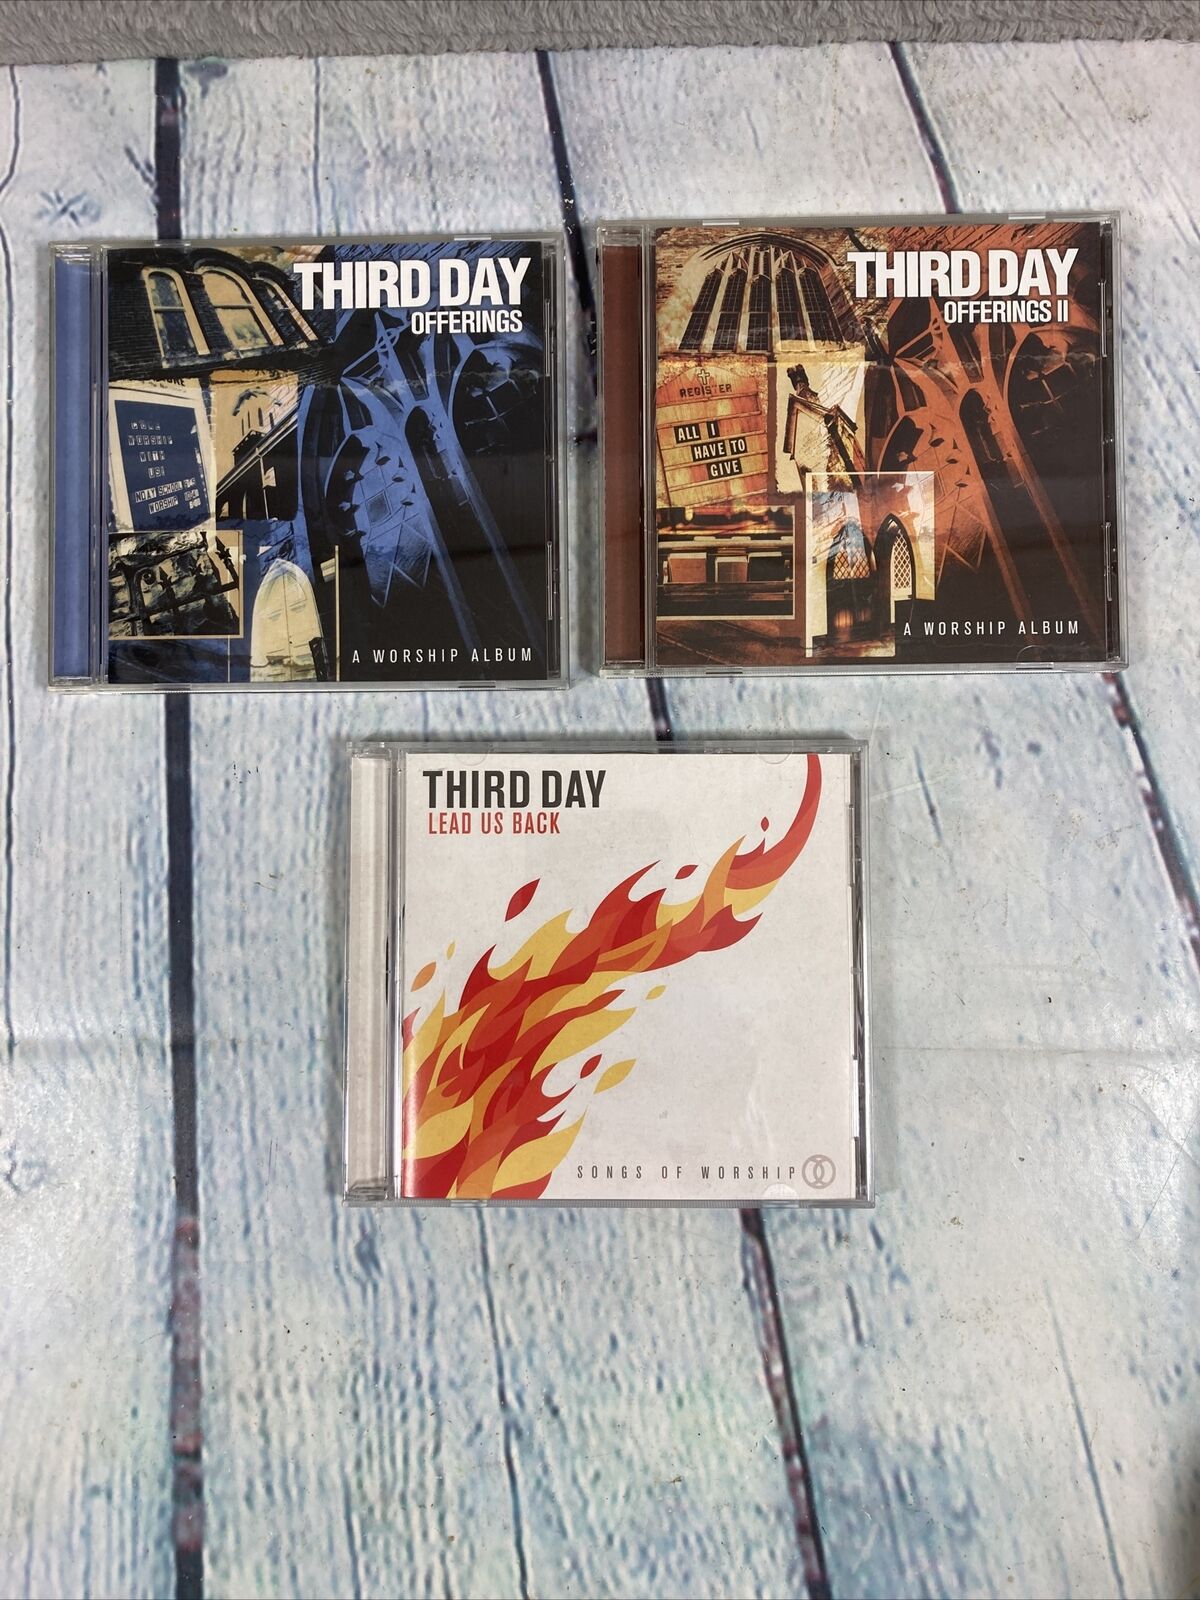 Lot of 3 Third Day Cd\'s - Lead Us Back, Offerings, Offerings 2 - Christian